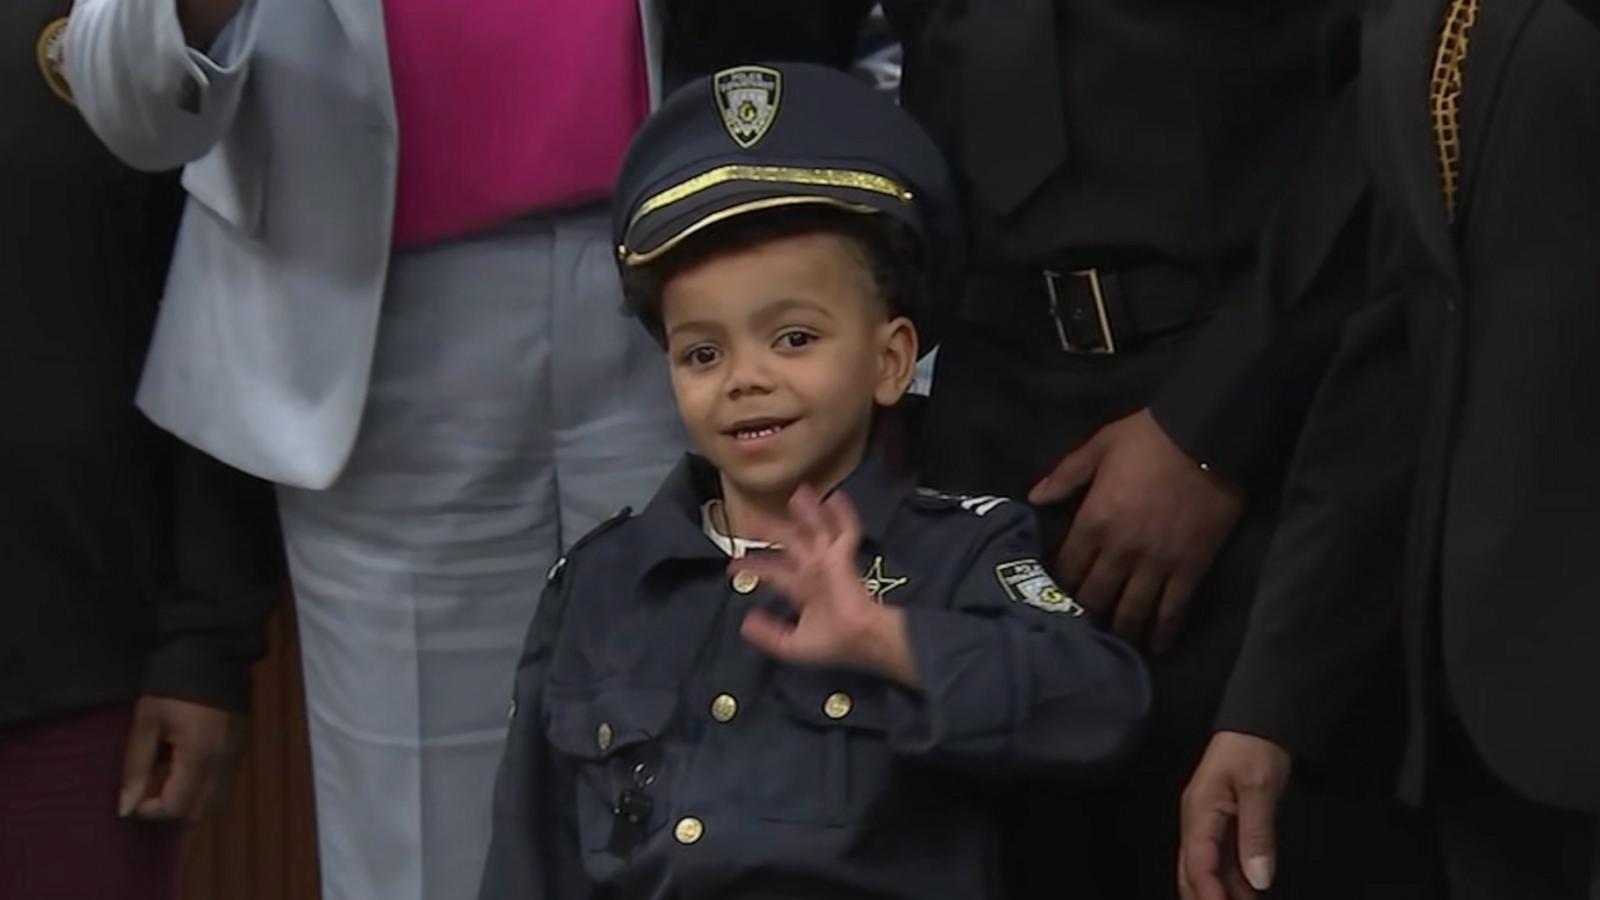 VIDEO: 6-year-old who has undergone dozens of surgeries sworn in as honorary police officer